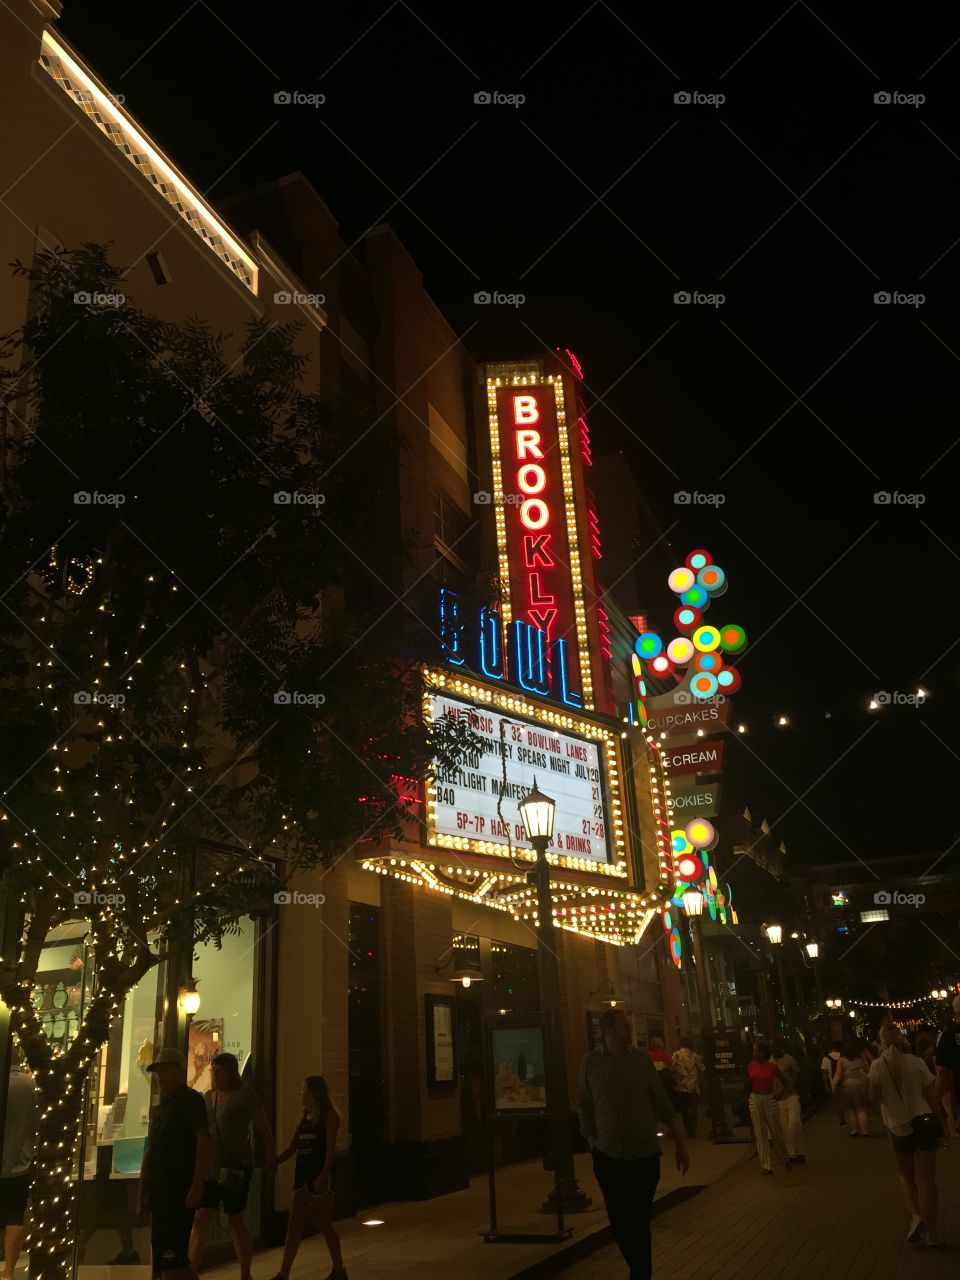 A classic old fashioned American cinema, with all the dazzling lights you can imagine. Bright colours catch your eyes, standing out on the jet-Black night sky. Trees twisted with fairy lights match the stunning sign. 